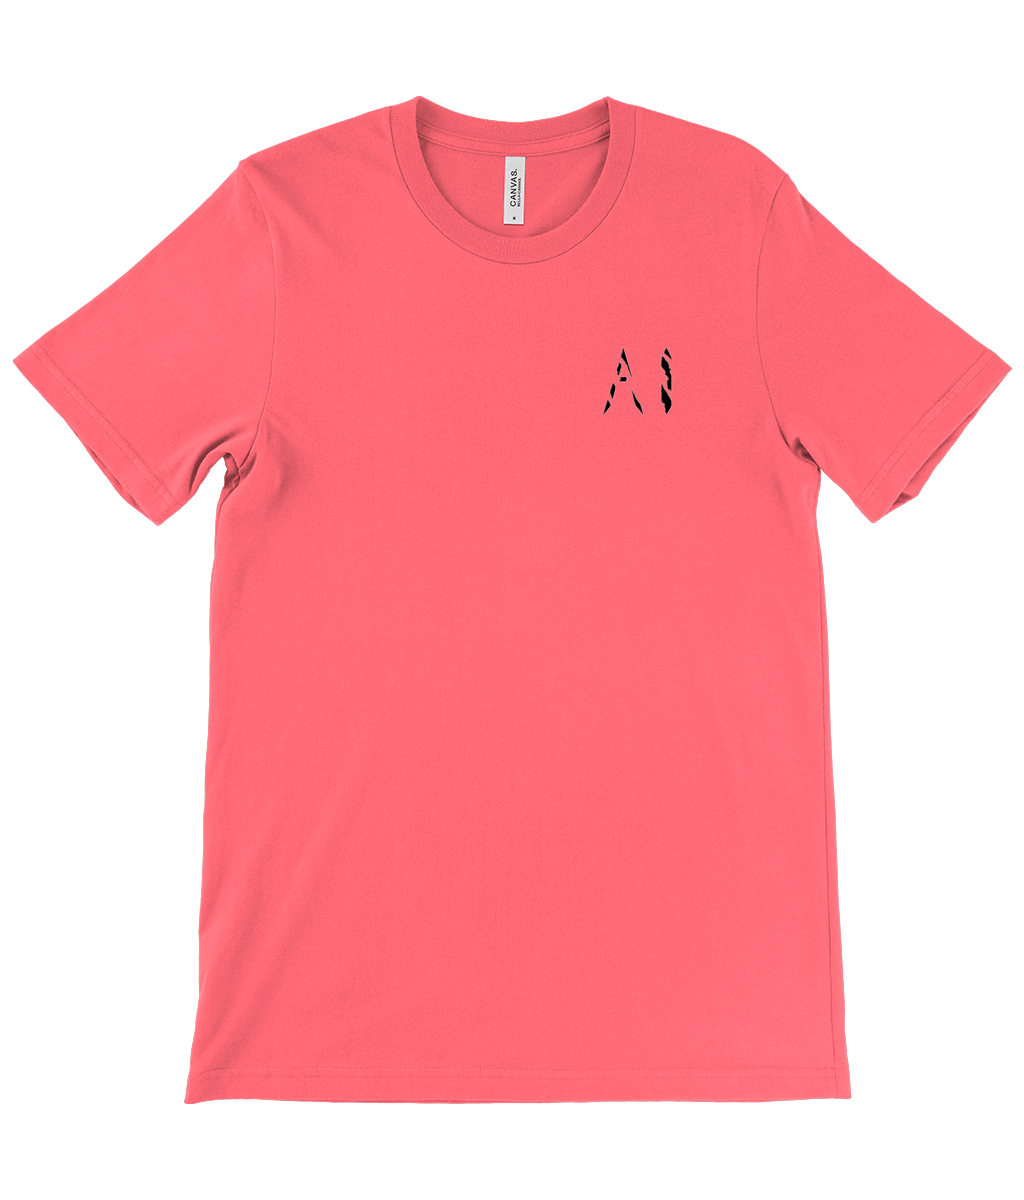 Mens rose Casual T-Shirt with black AI logo on the left chest